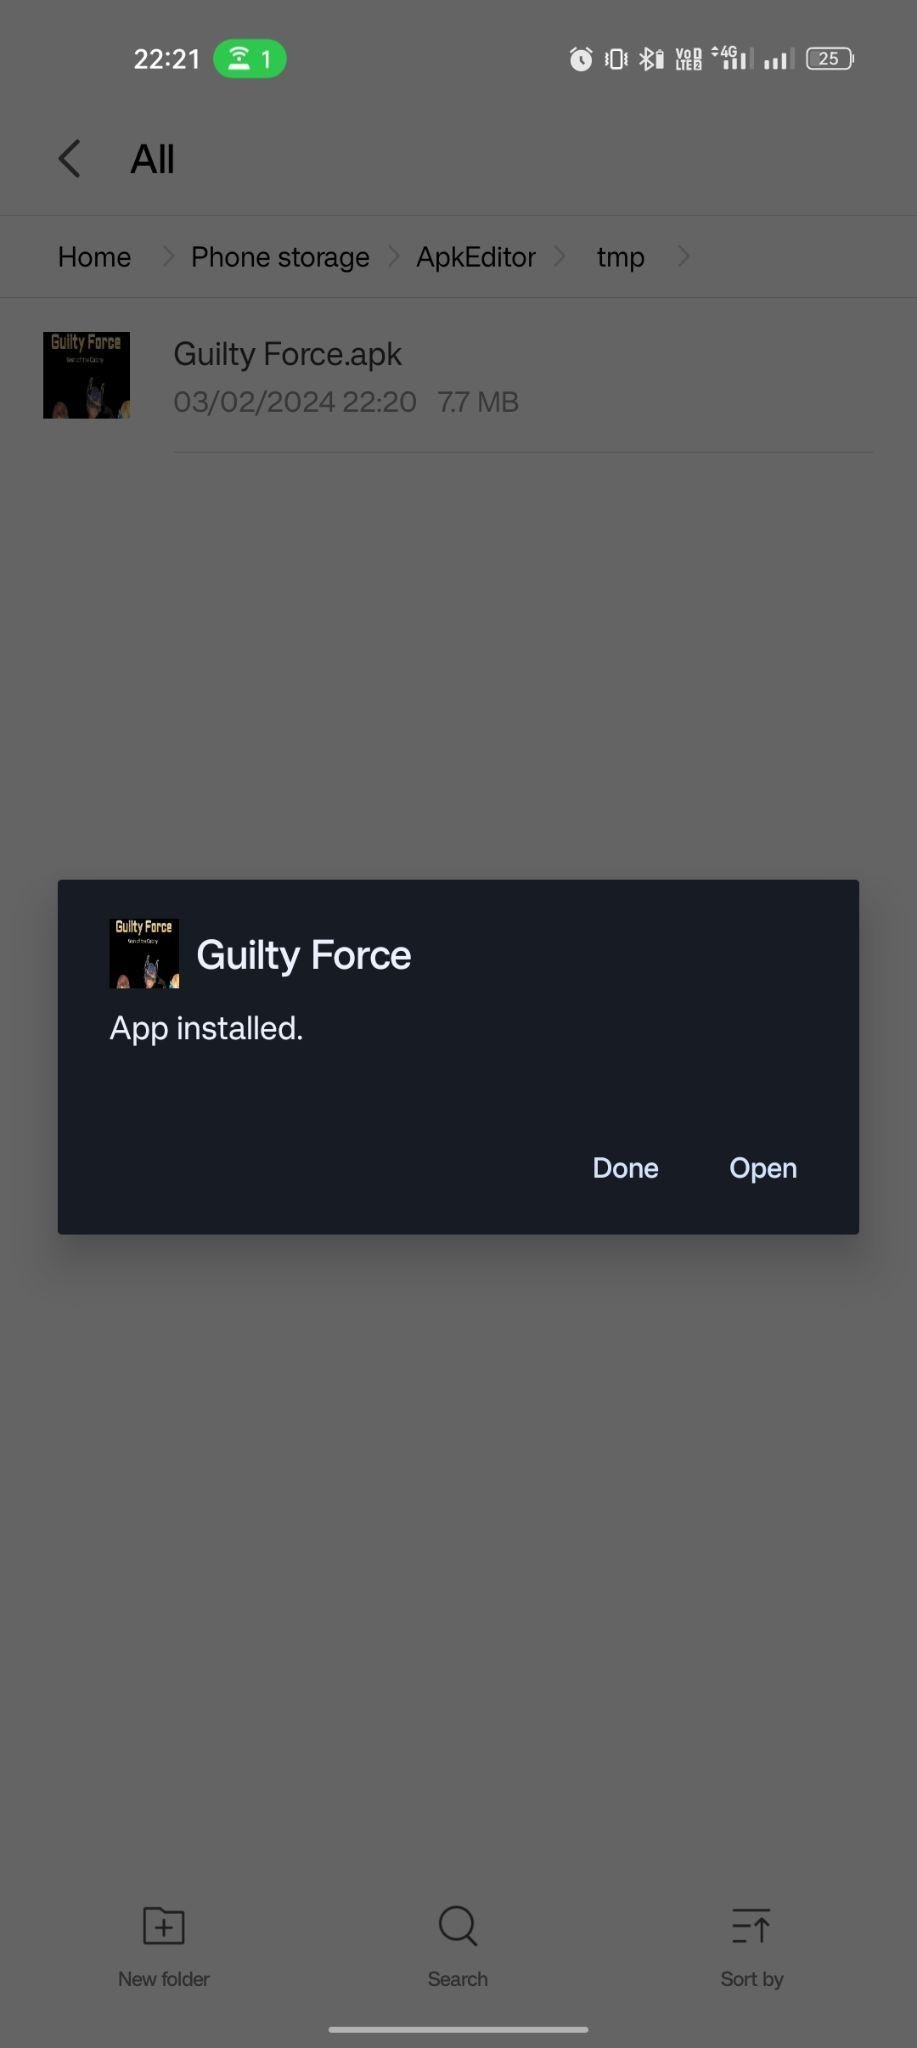 Guilty Force apk installed